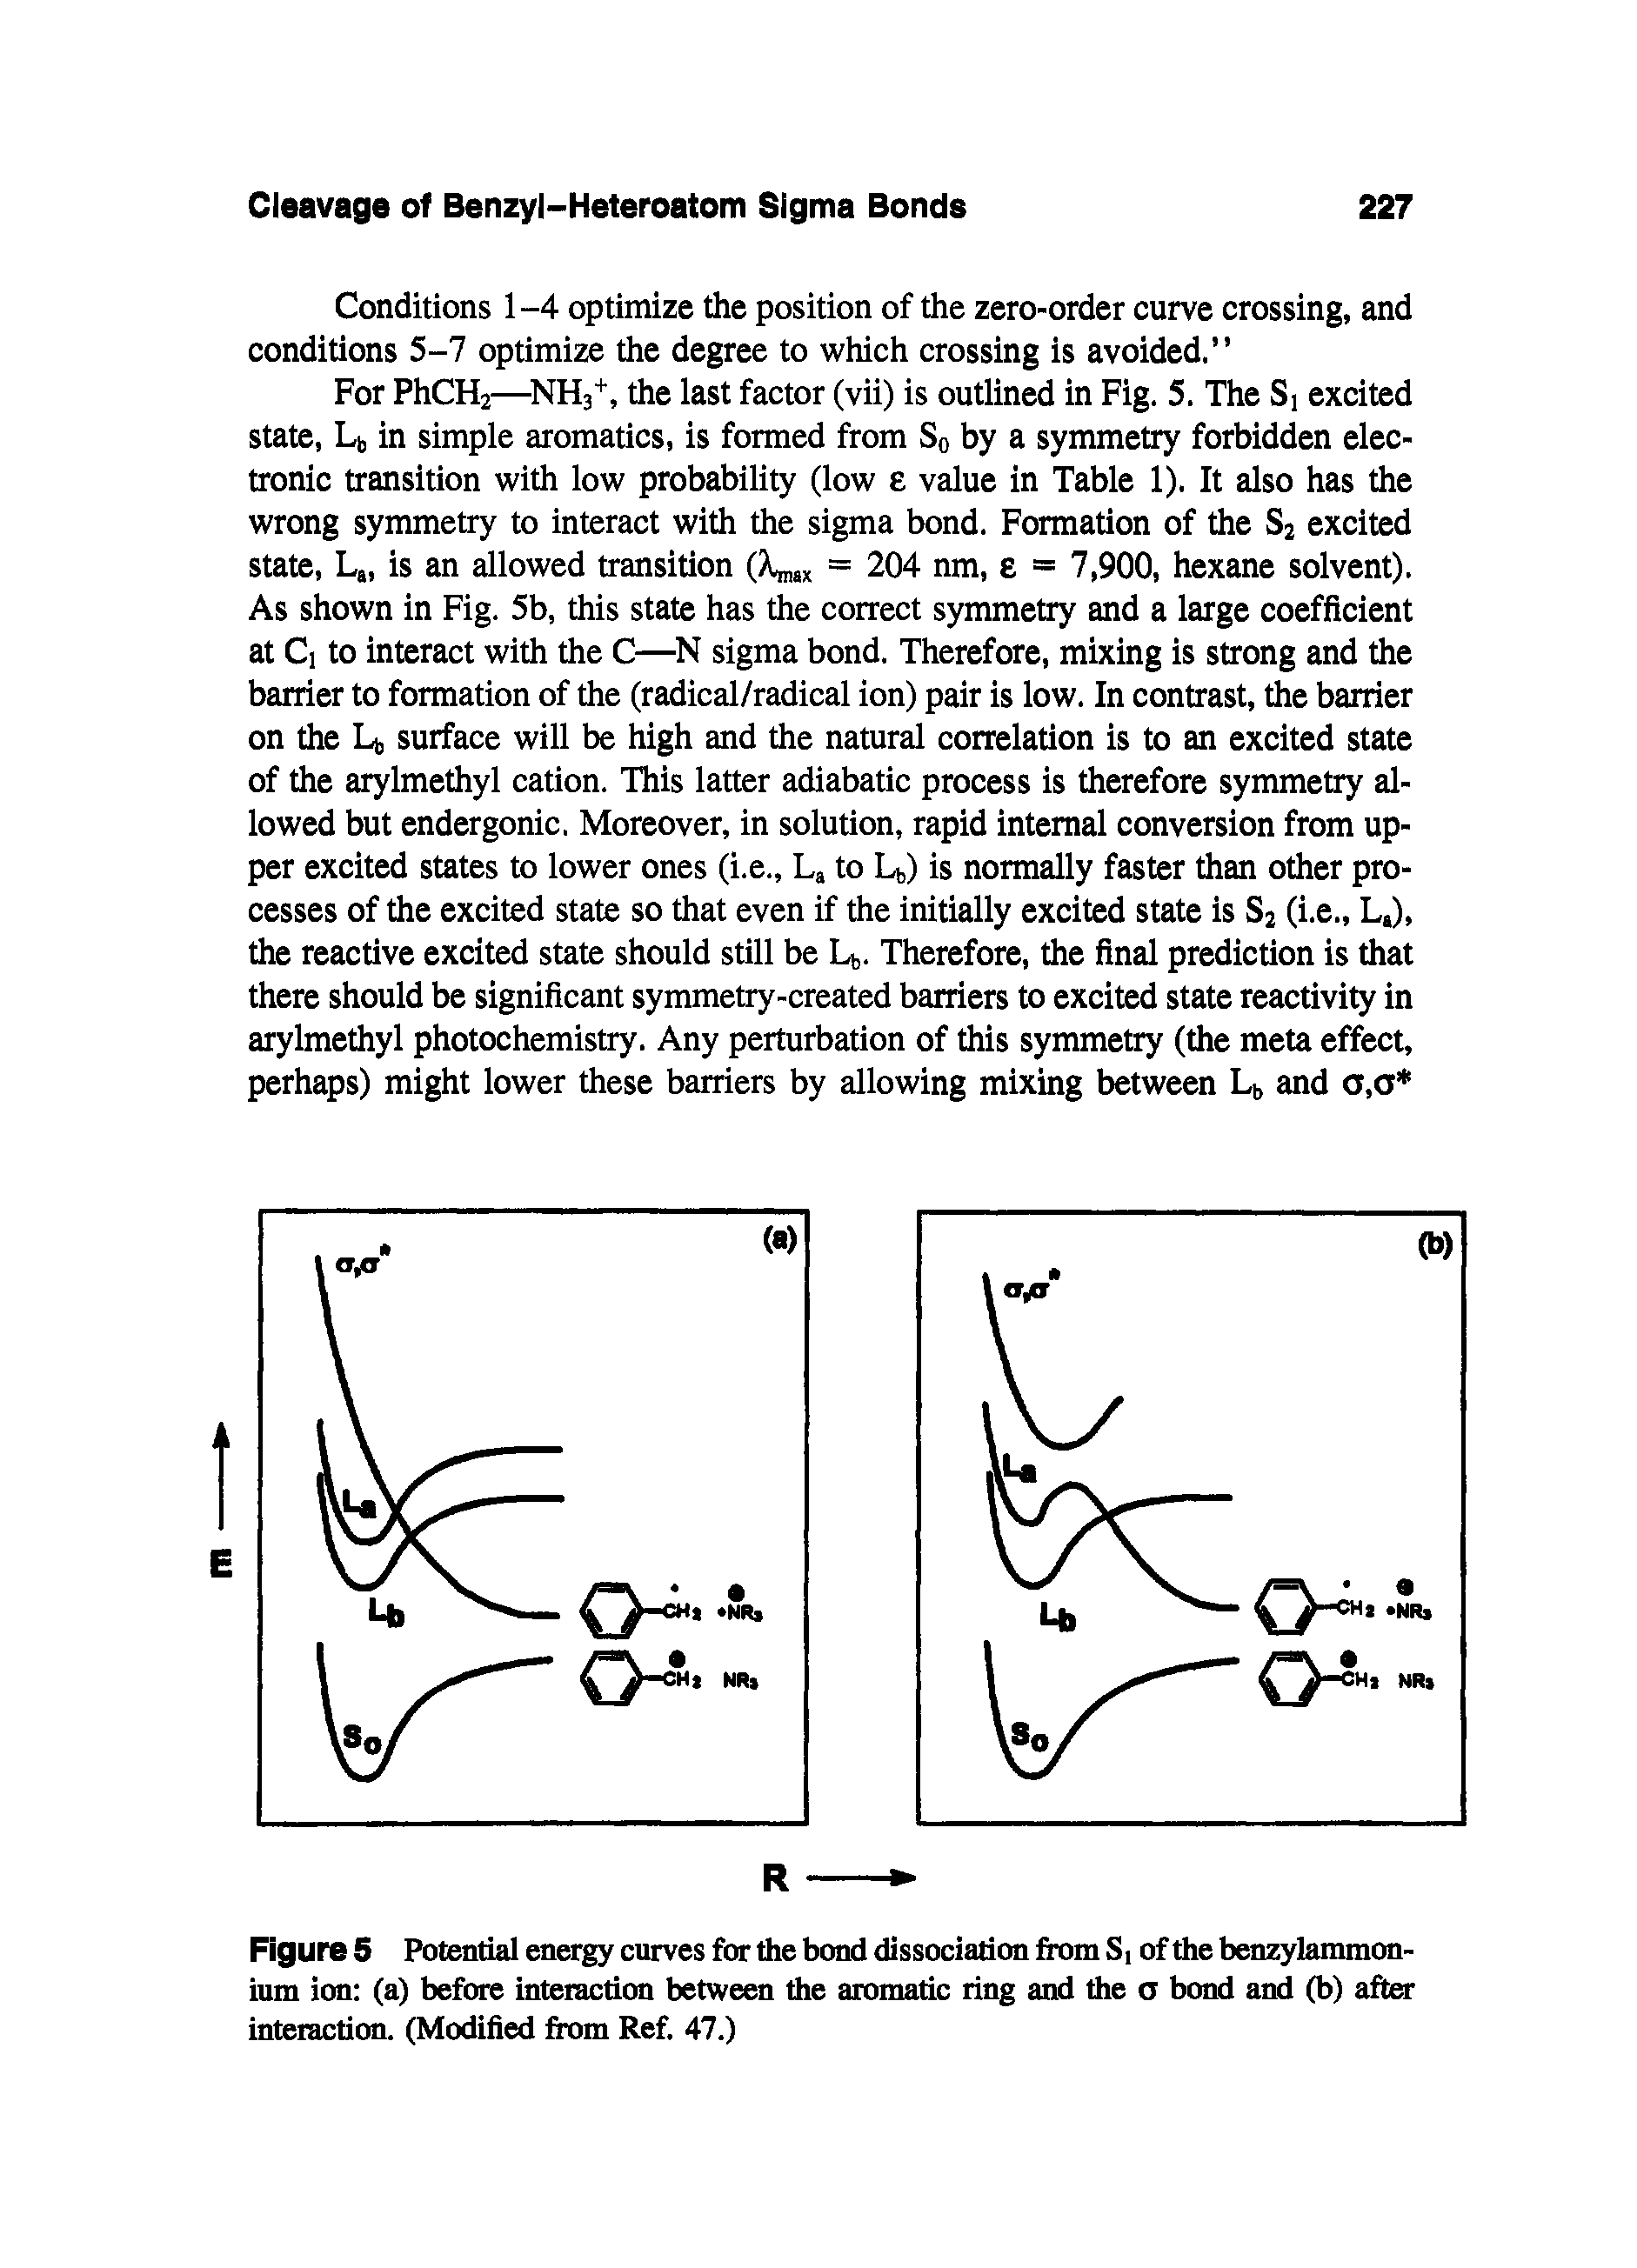 Figure 5 Potential energy curves for the bond dissociation from Si of the benzylammon-ium ion (a) before interaction between the aromatic ring and the a bond and (b) after interaction. (Modified from Ref. 47.)...